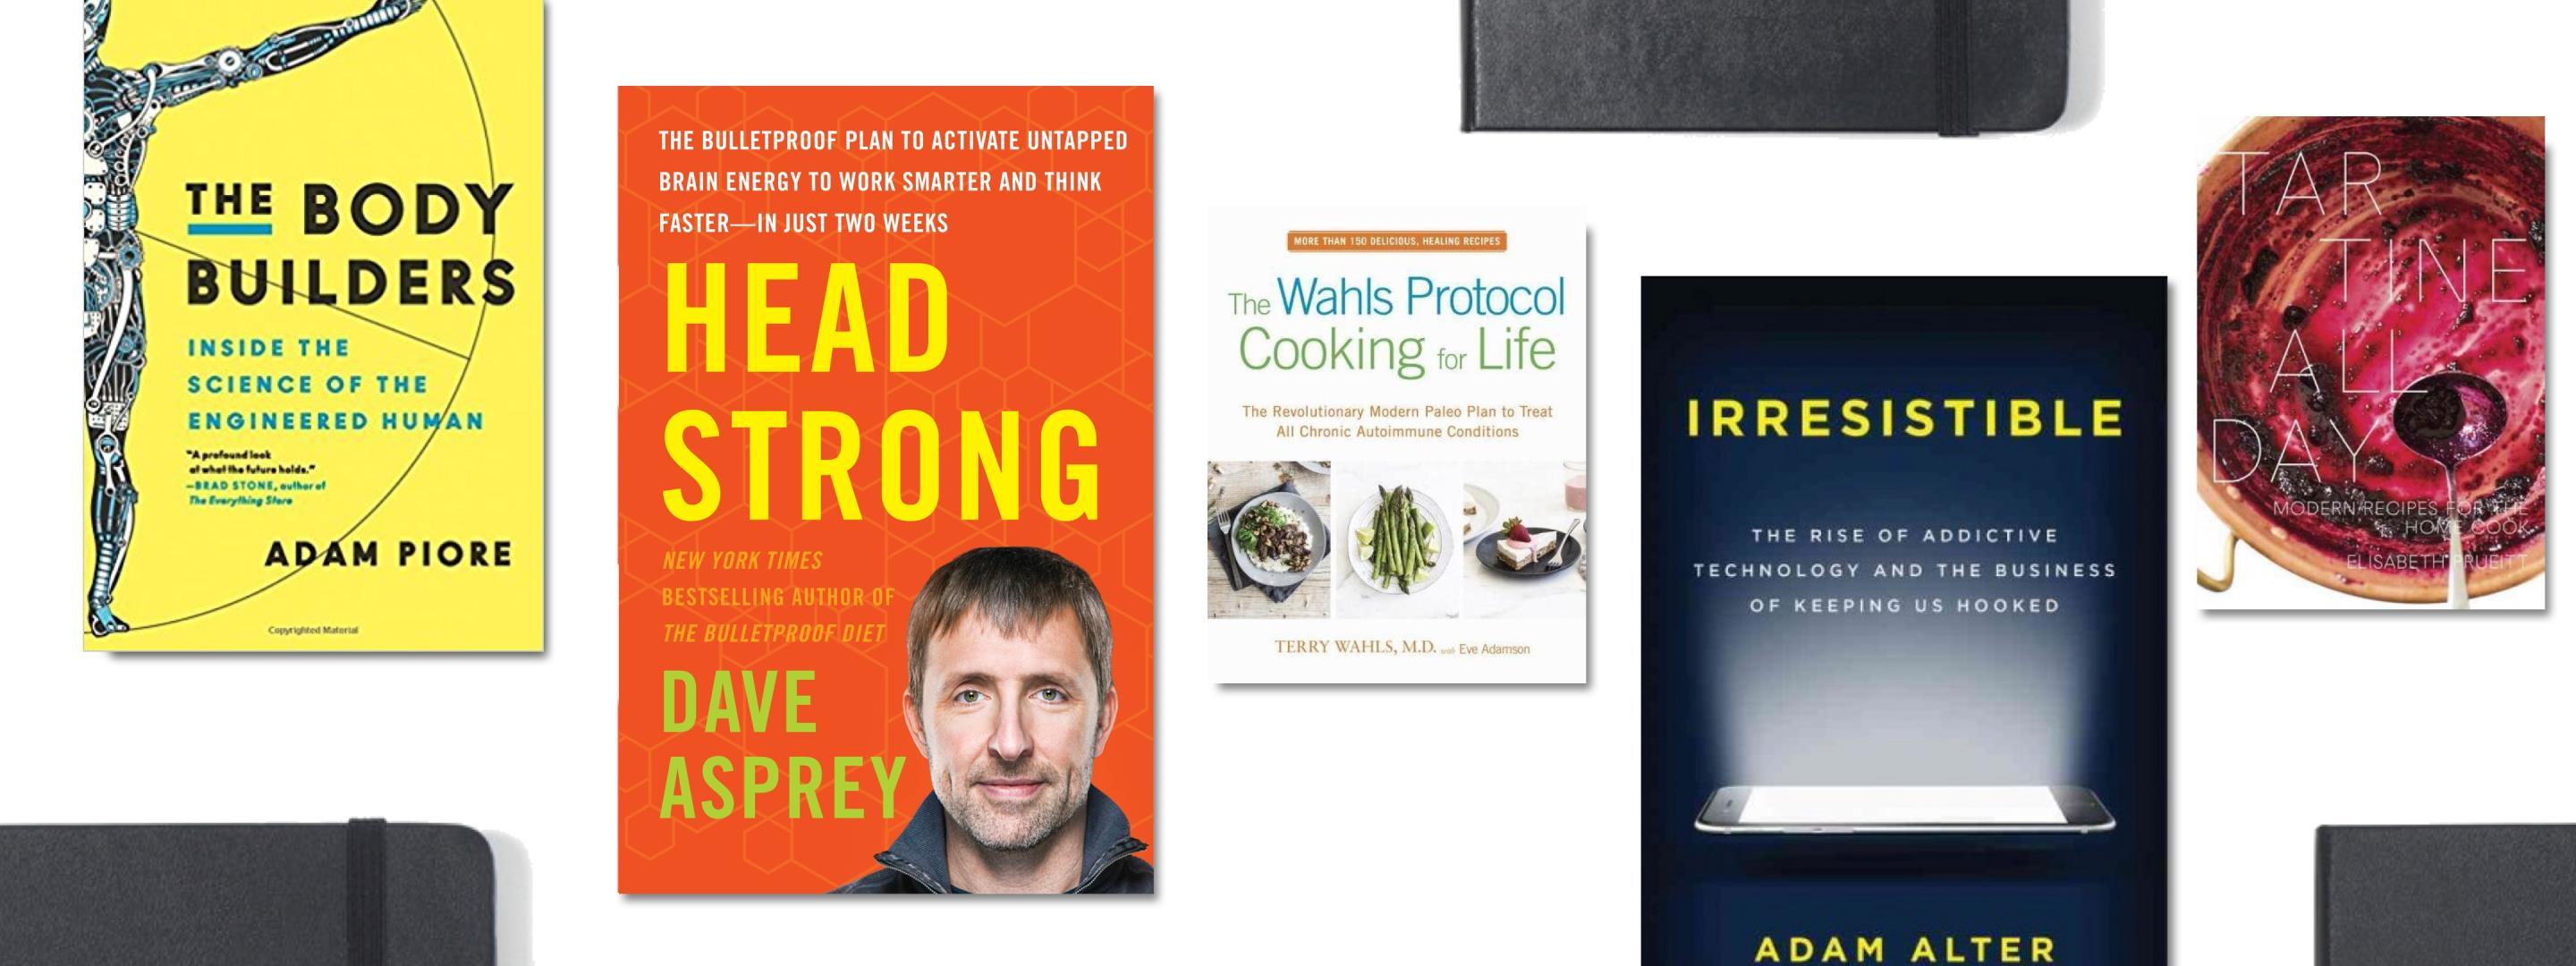 Head Strong: The Bulletproof Plan to Activate Untapped Brain